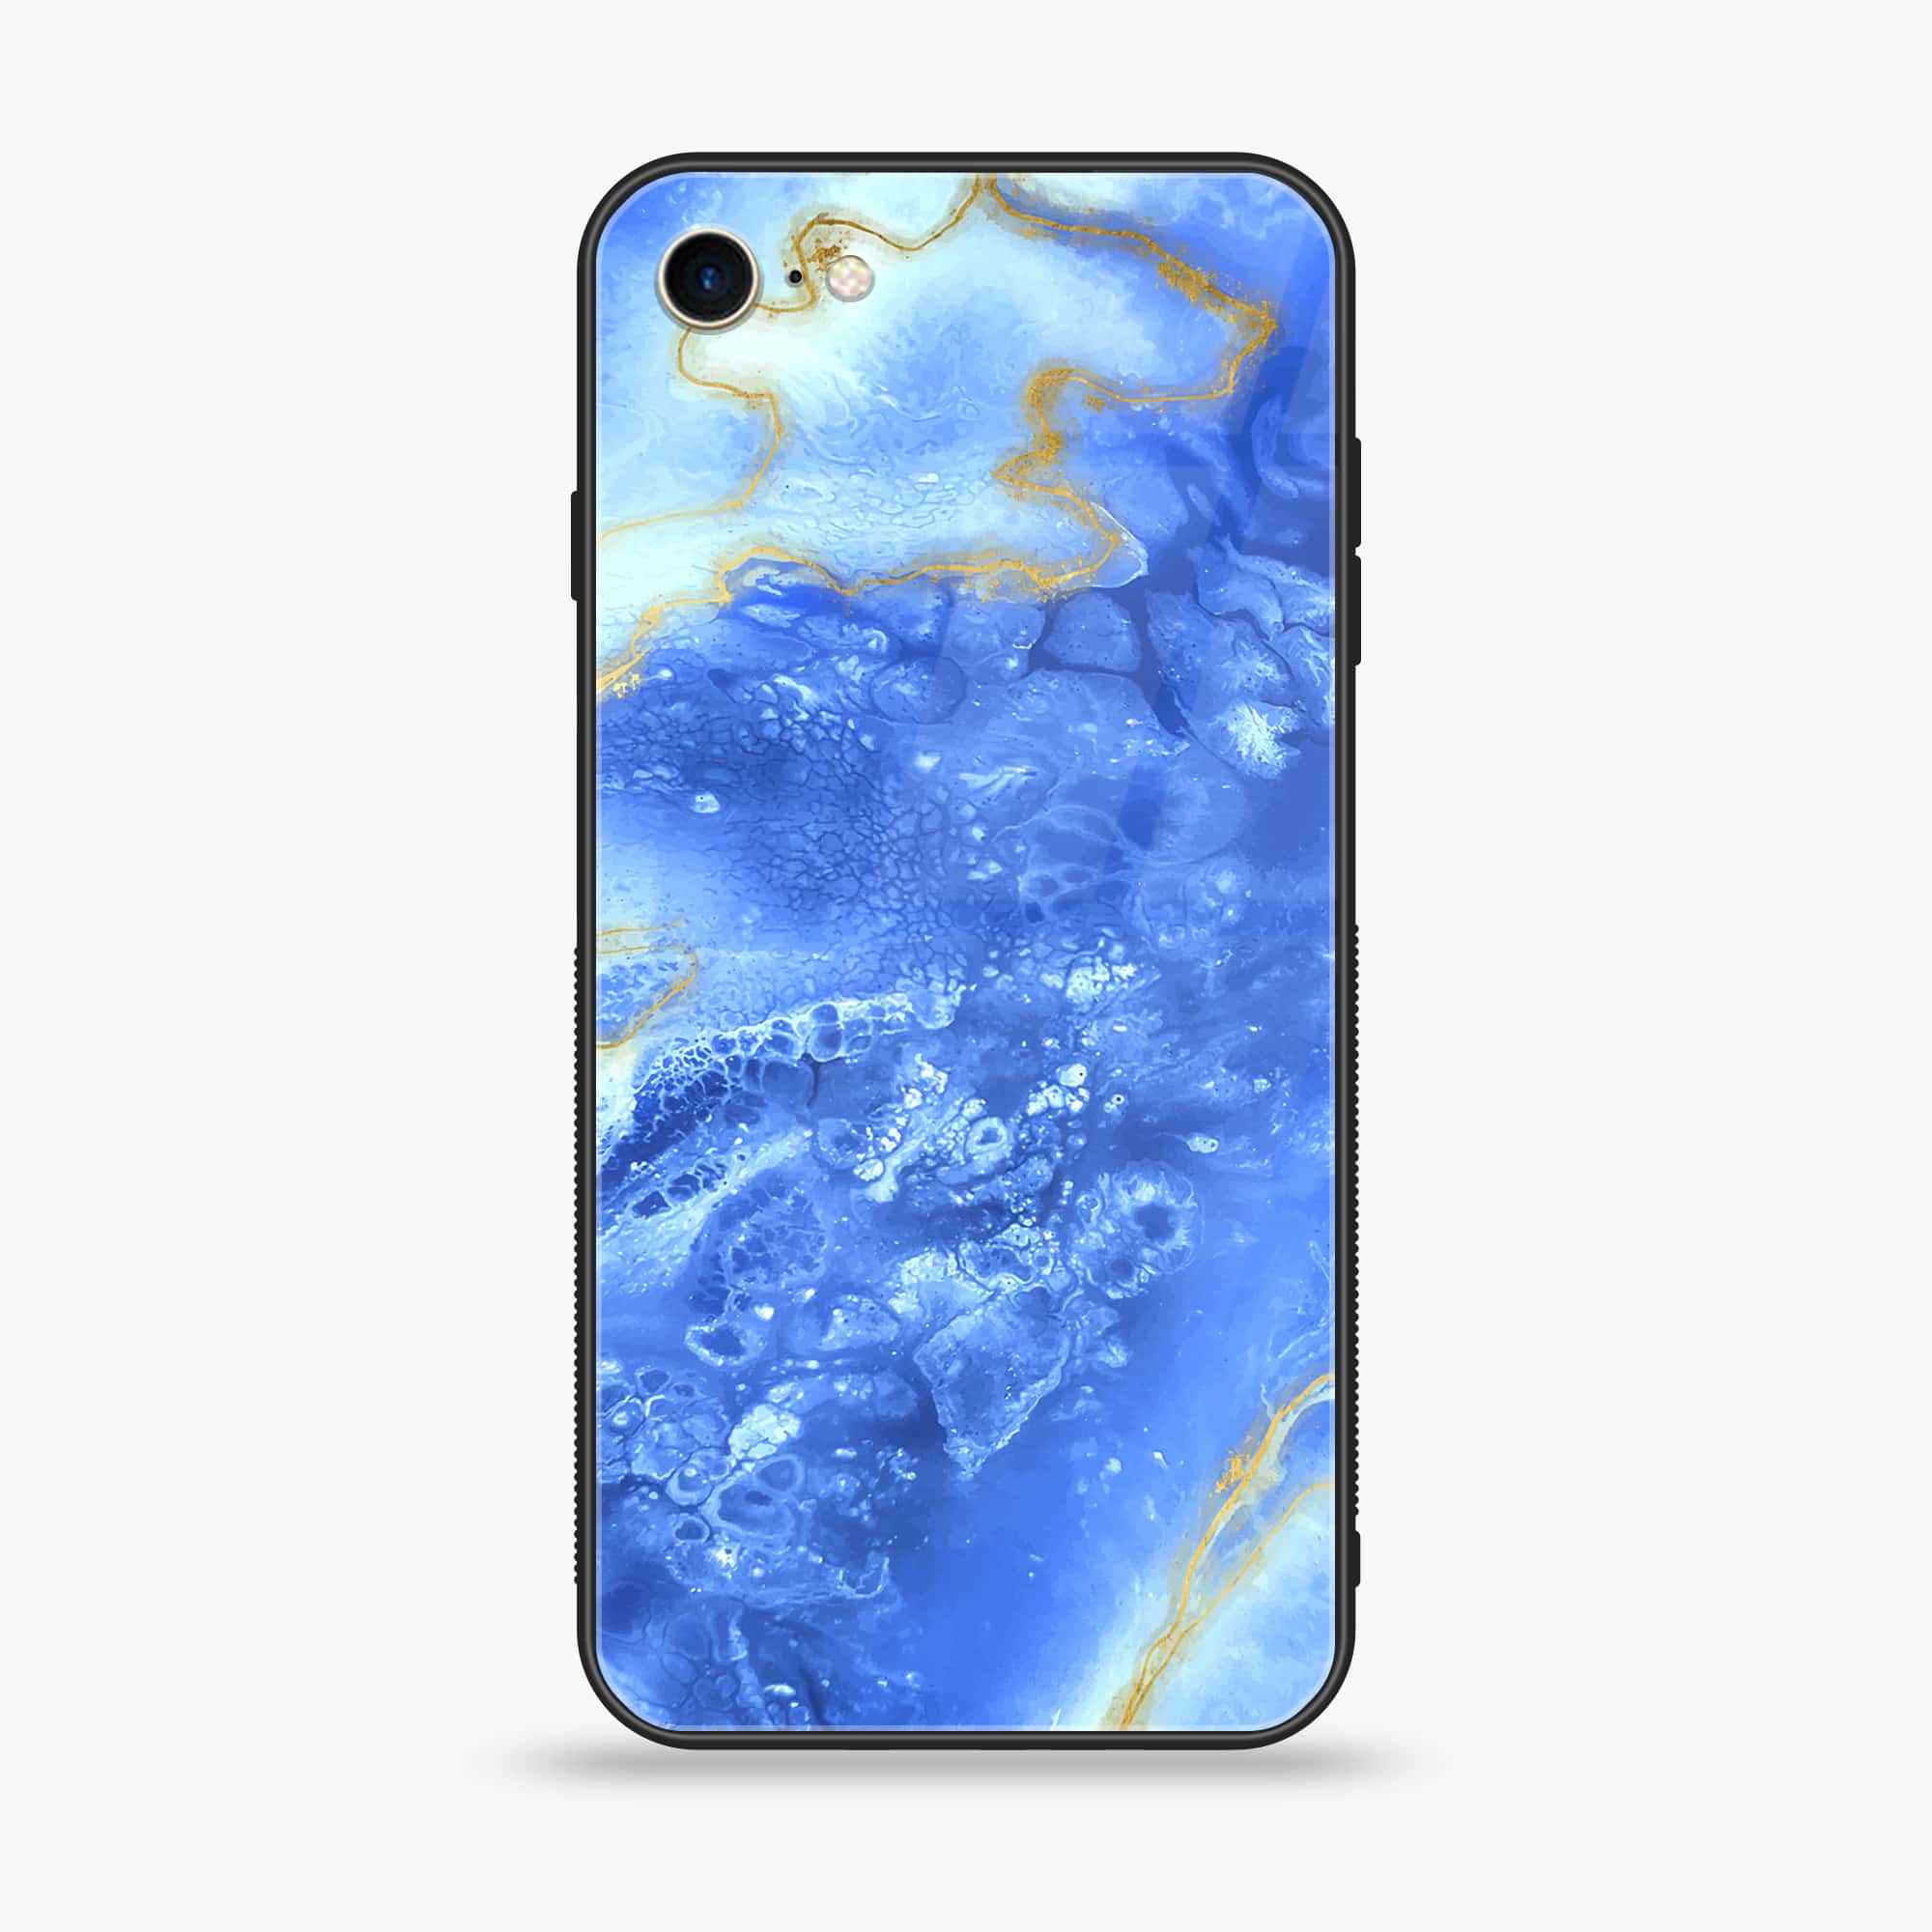 iPhone 7 - Blue Marble Series V 2.0 - Premium Printed Glass soft Bumper shock Proof Case